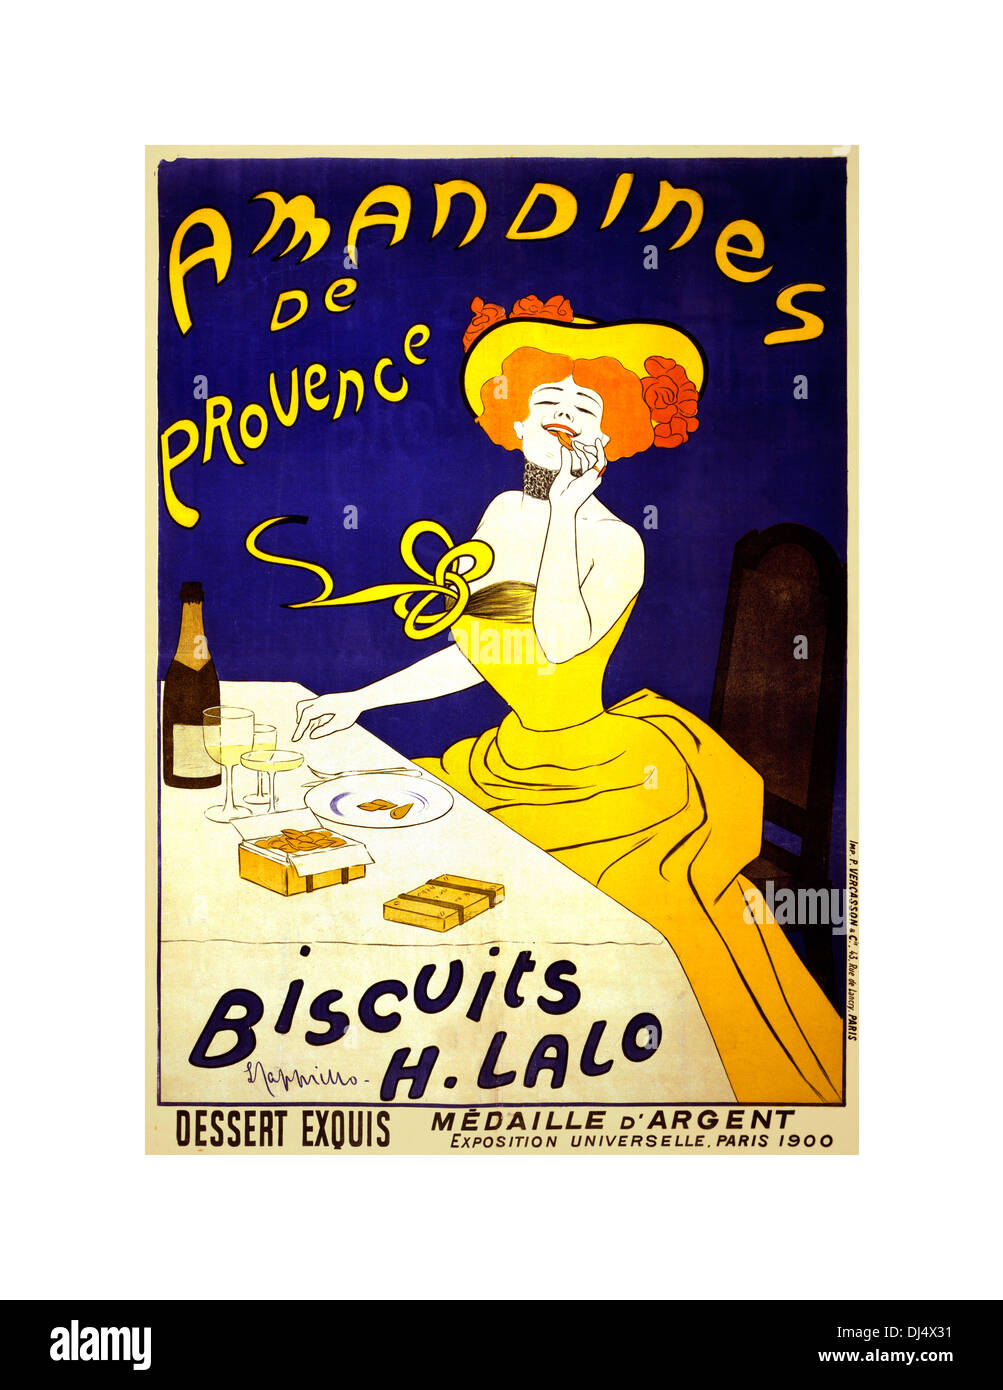 1900 French poster for Amandines de Provence biscuits by H Lalo winning the medaille d'argent (gold medal) Stock Photo